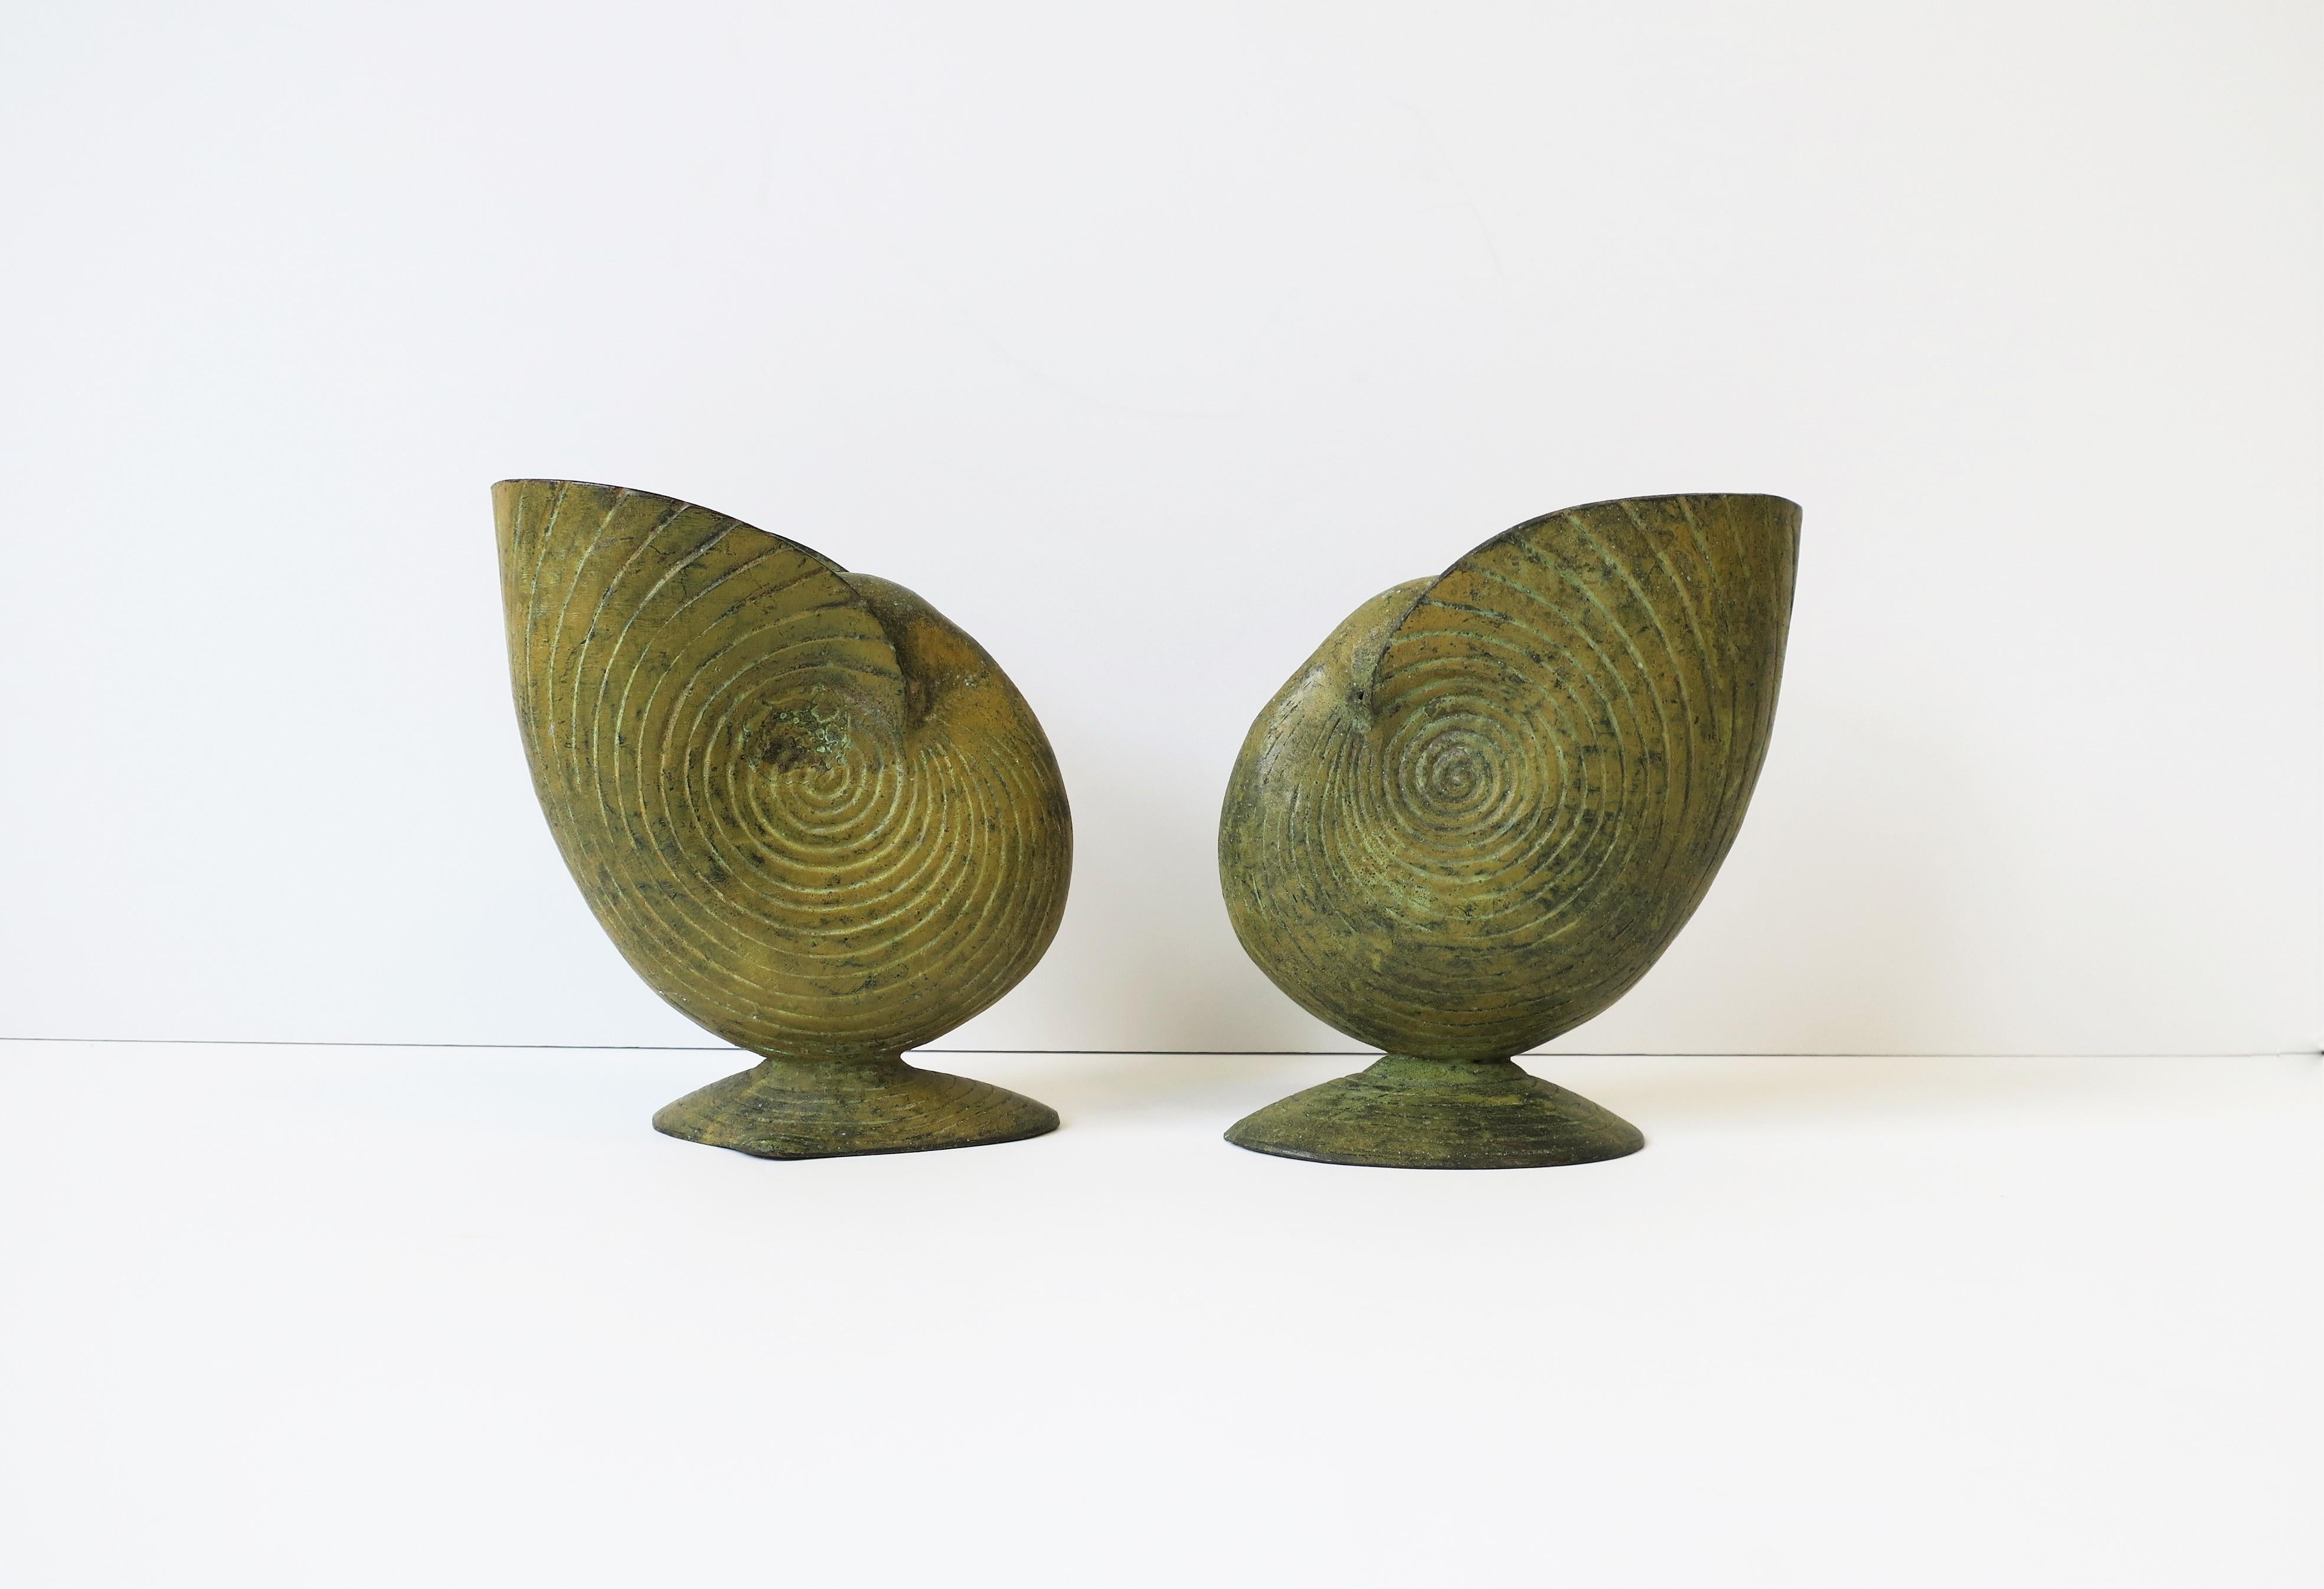 A great pair of mustard yellow metal nautilus seashell vases with clamshell bases, circa late-20th century. Great as standalone pieces decorative objects or as vases (shown with large leaf in image #8.) Dimensions: 6.63